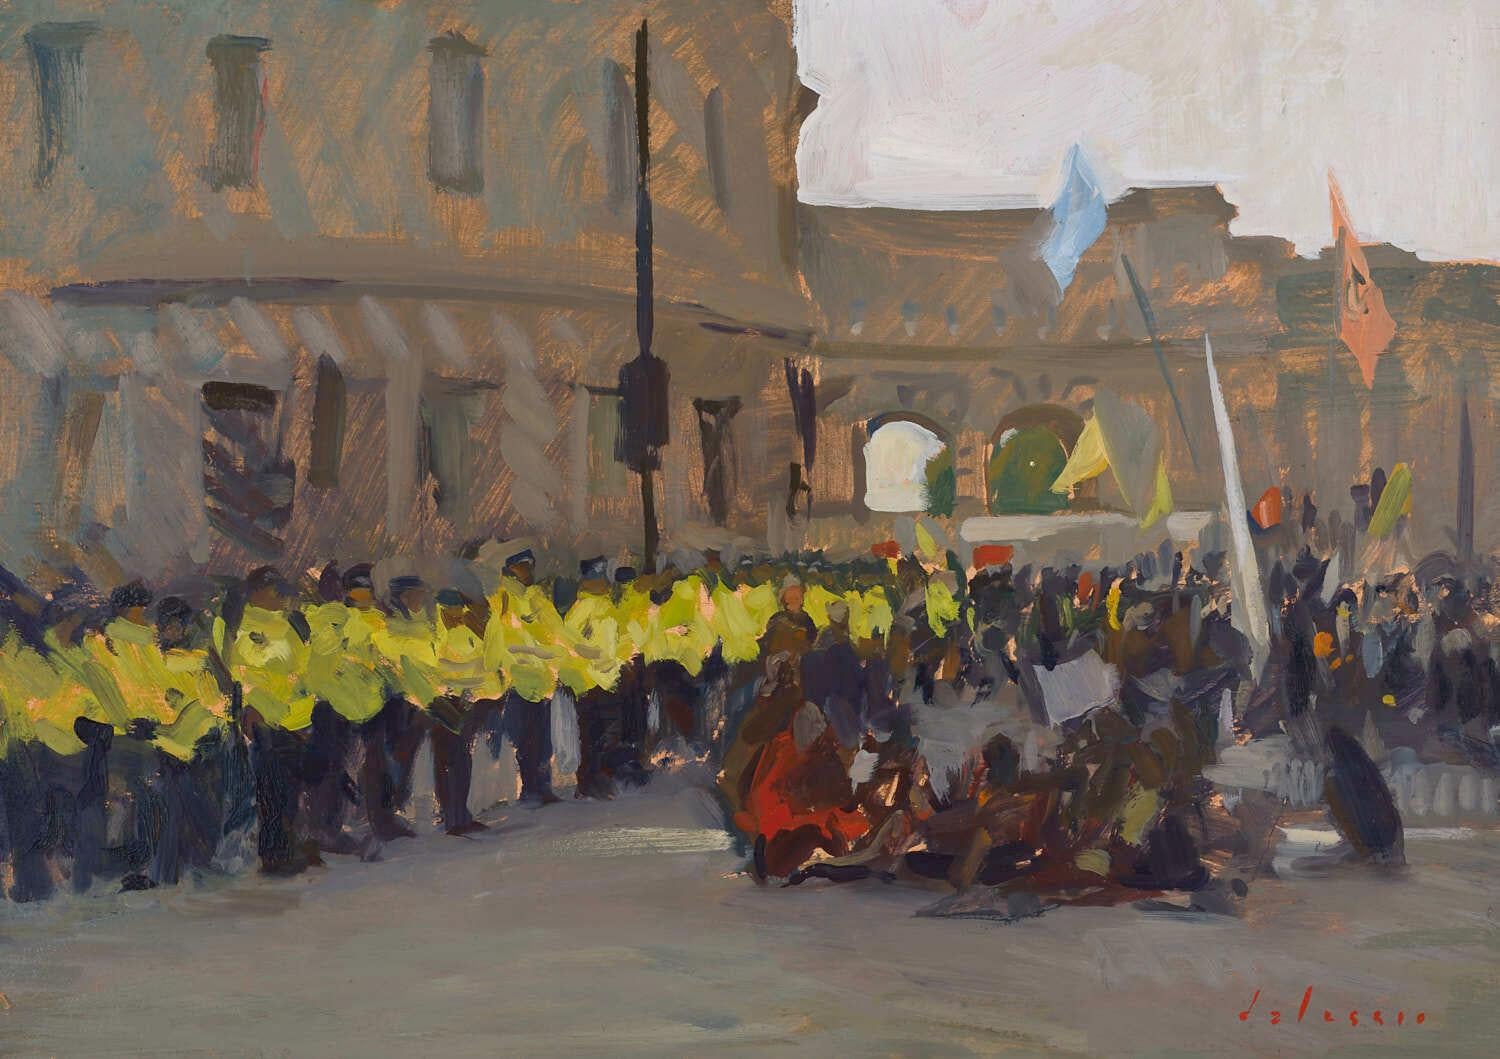 Marc Dalessio Figurative Painting - "Extinction Rebellion Protest, London" impressionist painting of 2019 protest